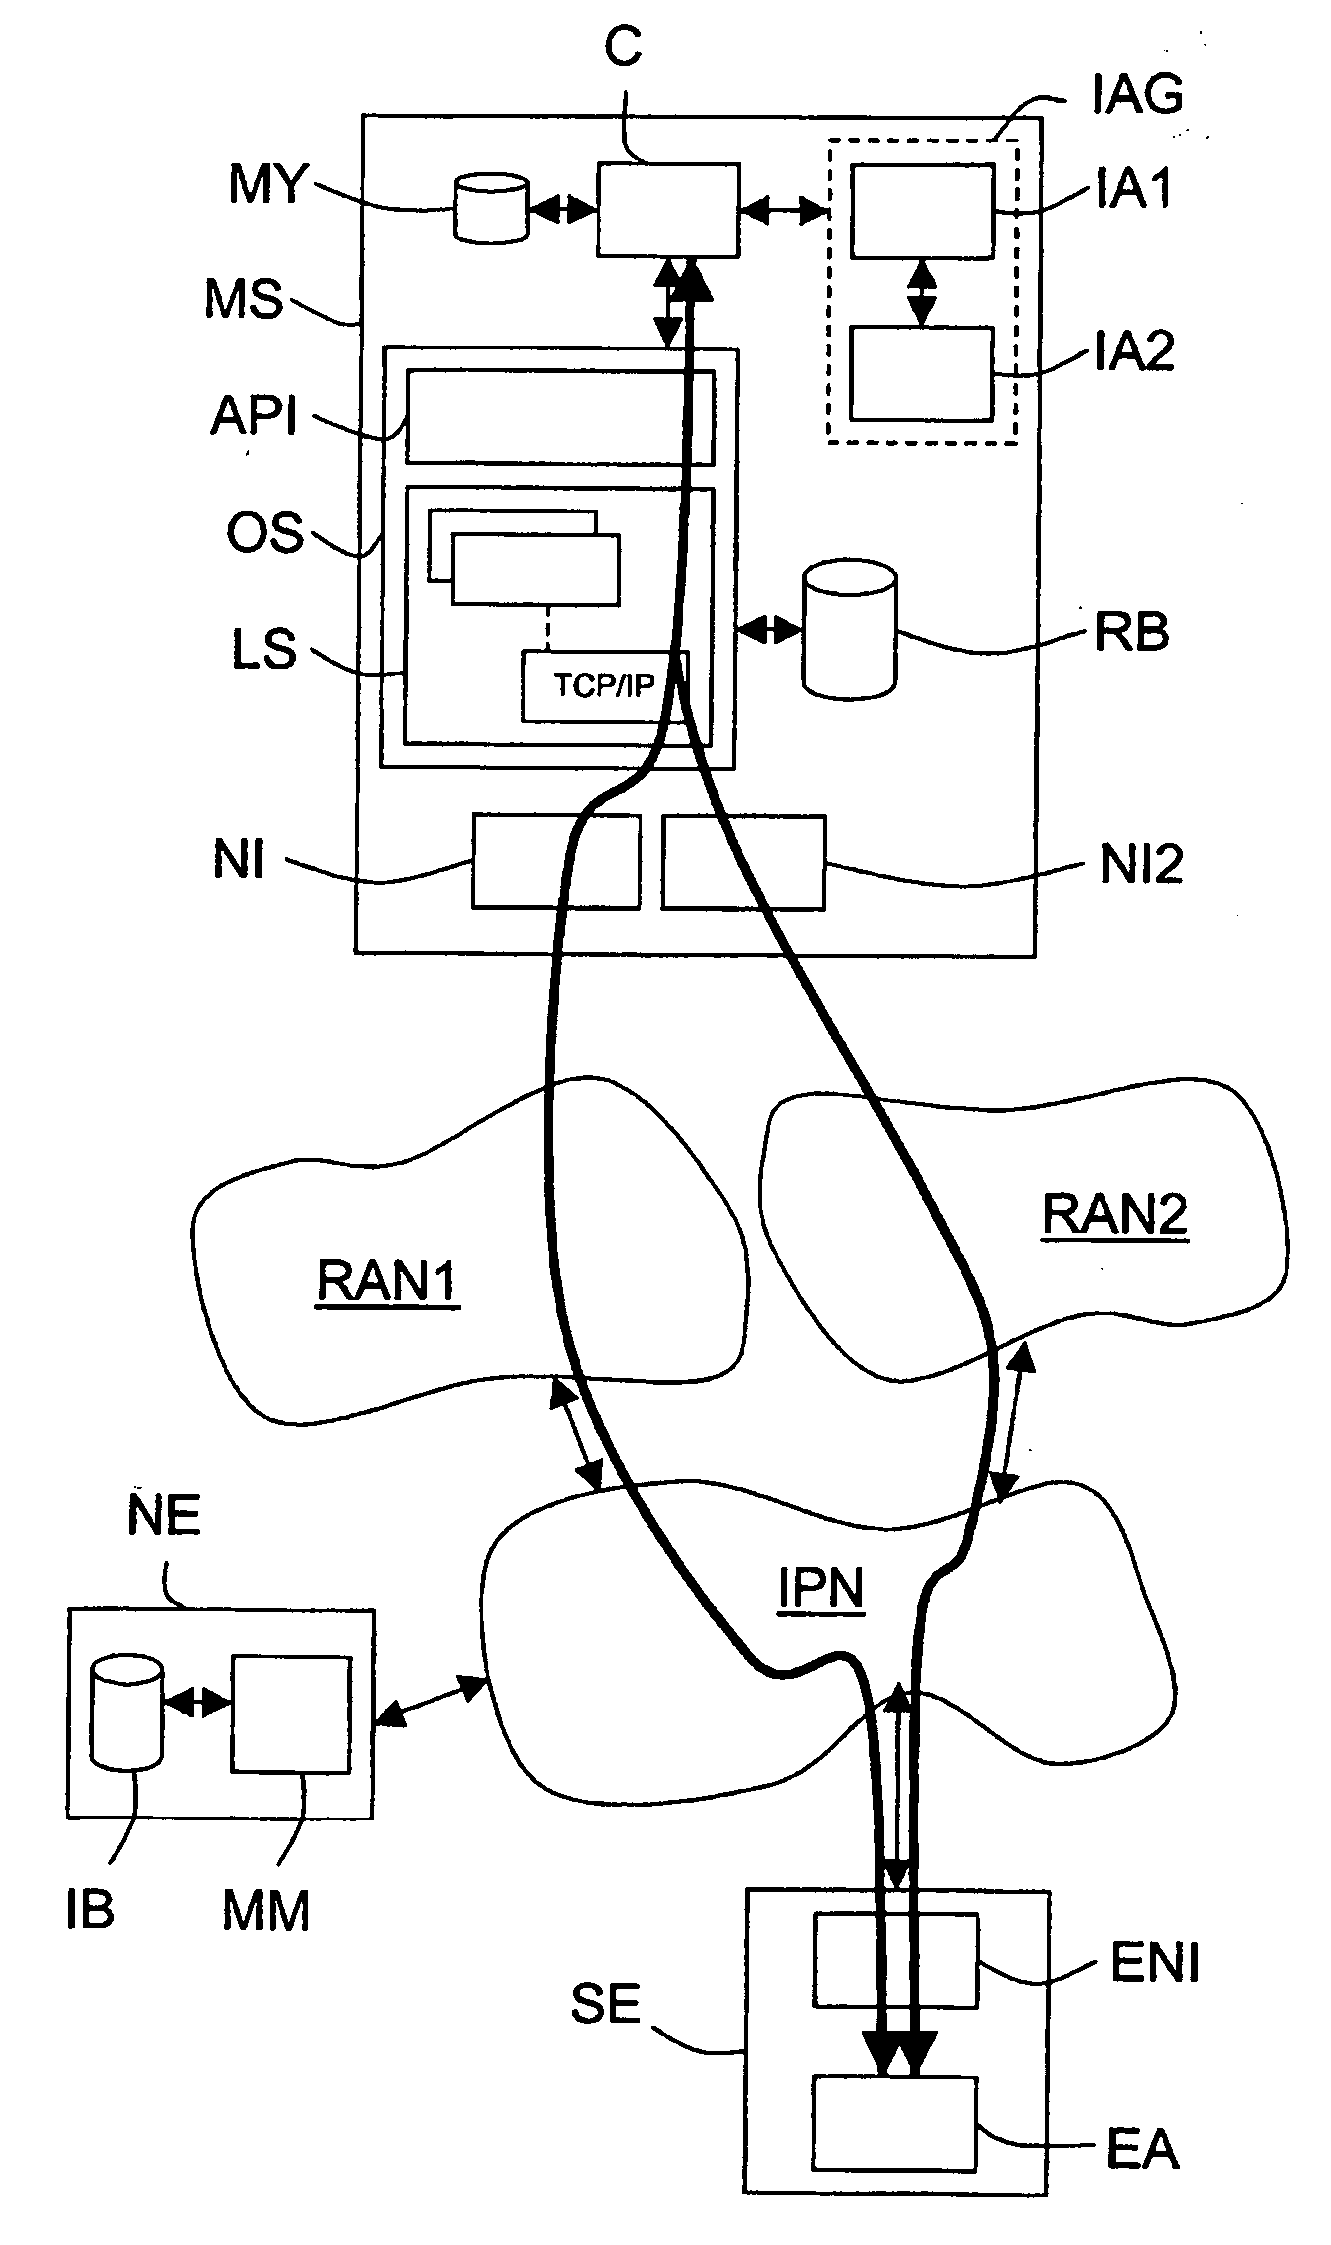 Network equipment for supplying multimode mobile terminals with data necessary for automatically selecting radio access network interfaces during service sessions